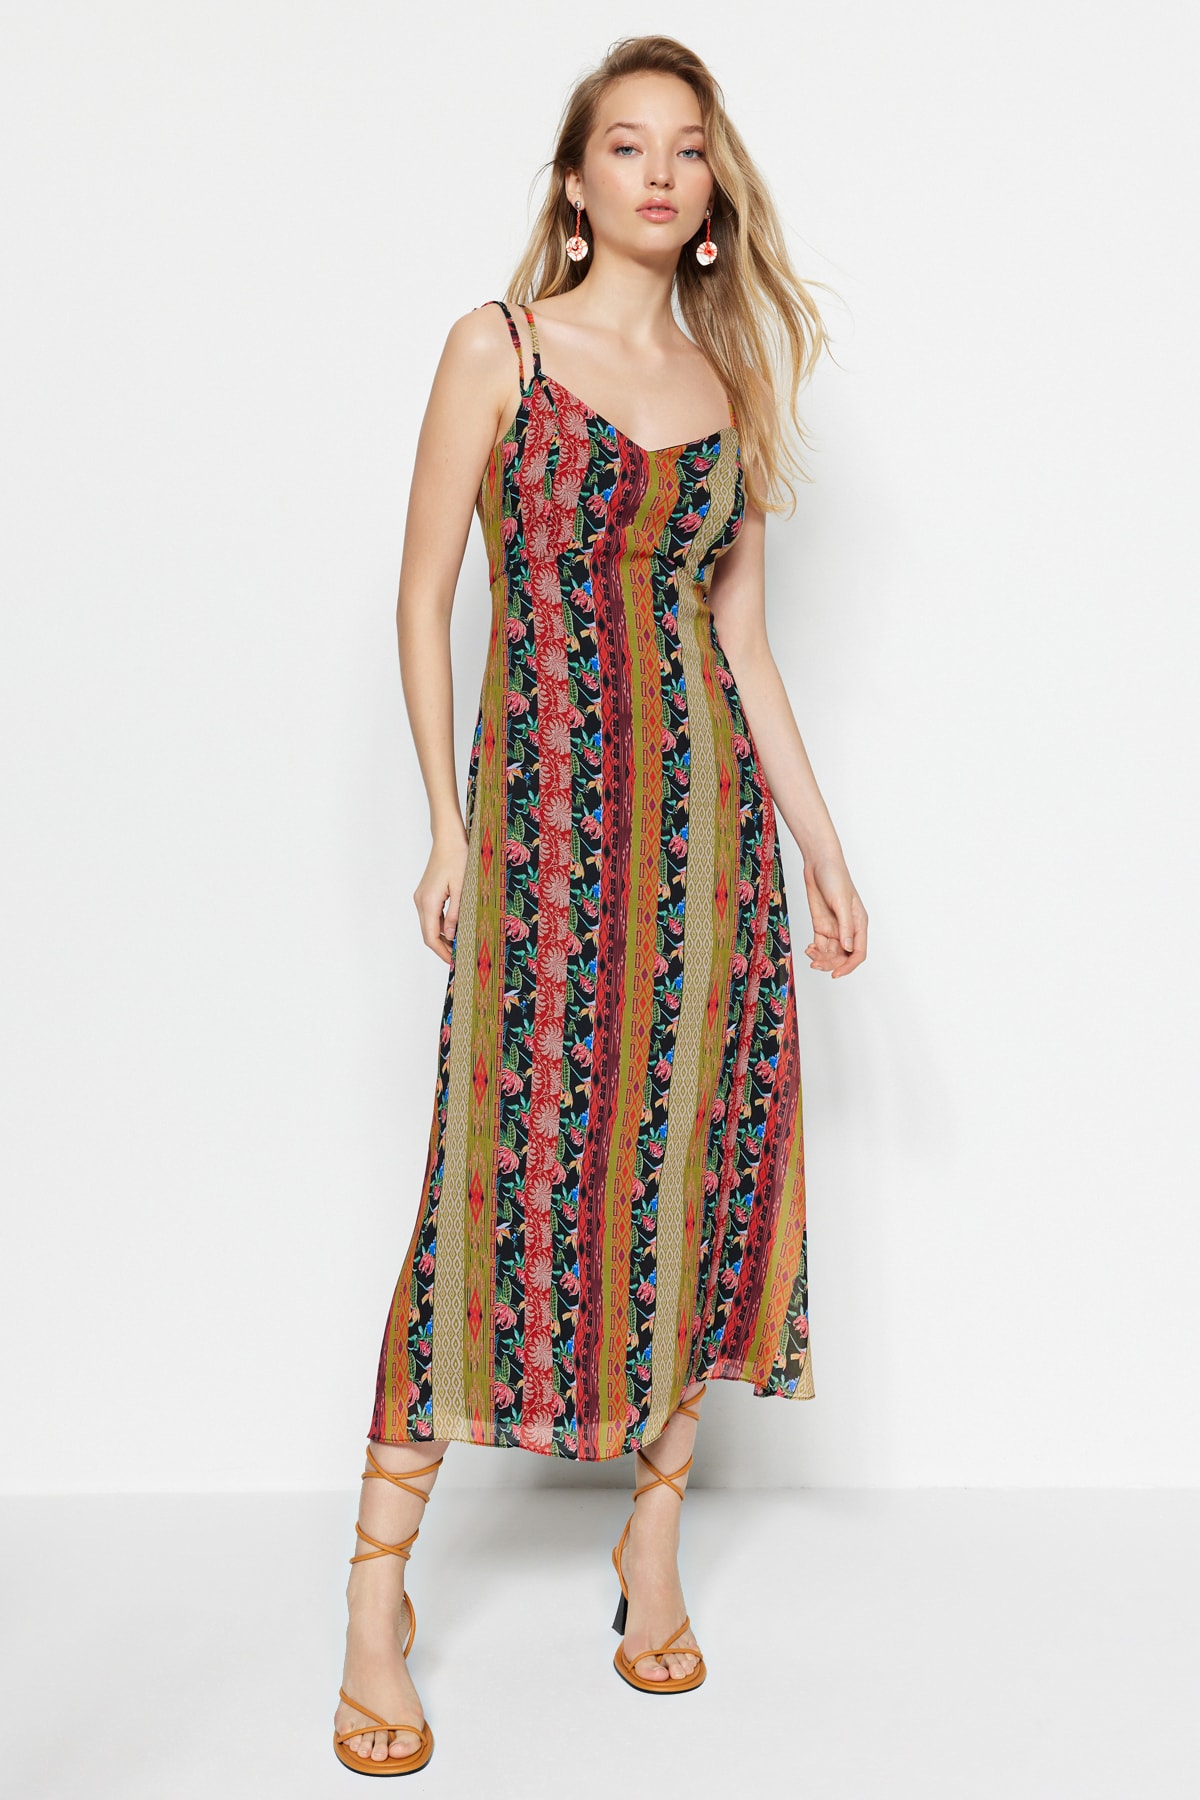 Trendyol Multi-Colored Patterned Strappy A-Line/Bell Form Midi Lined Woven Dress